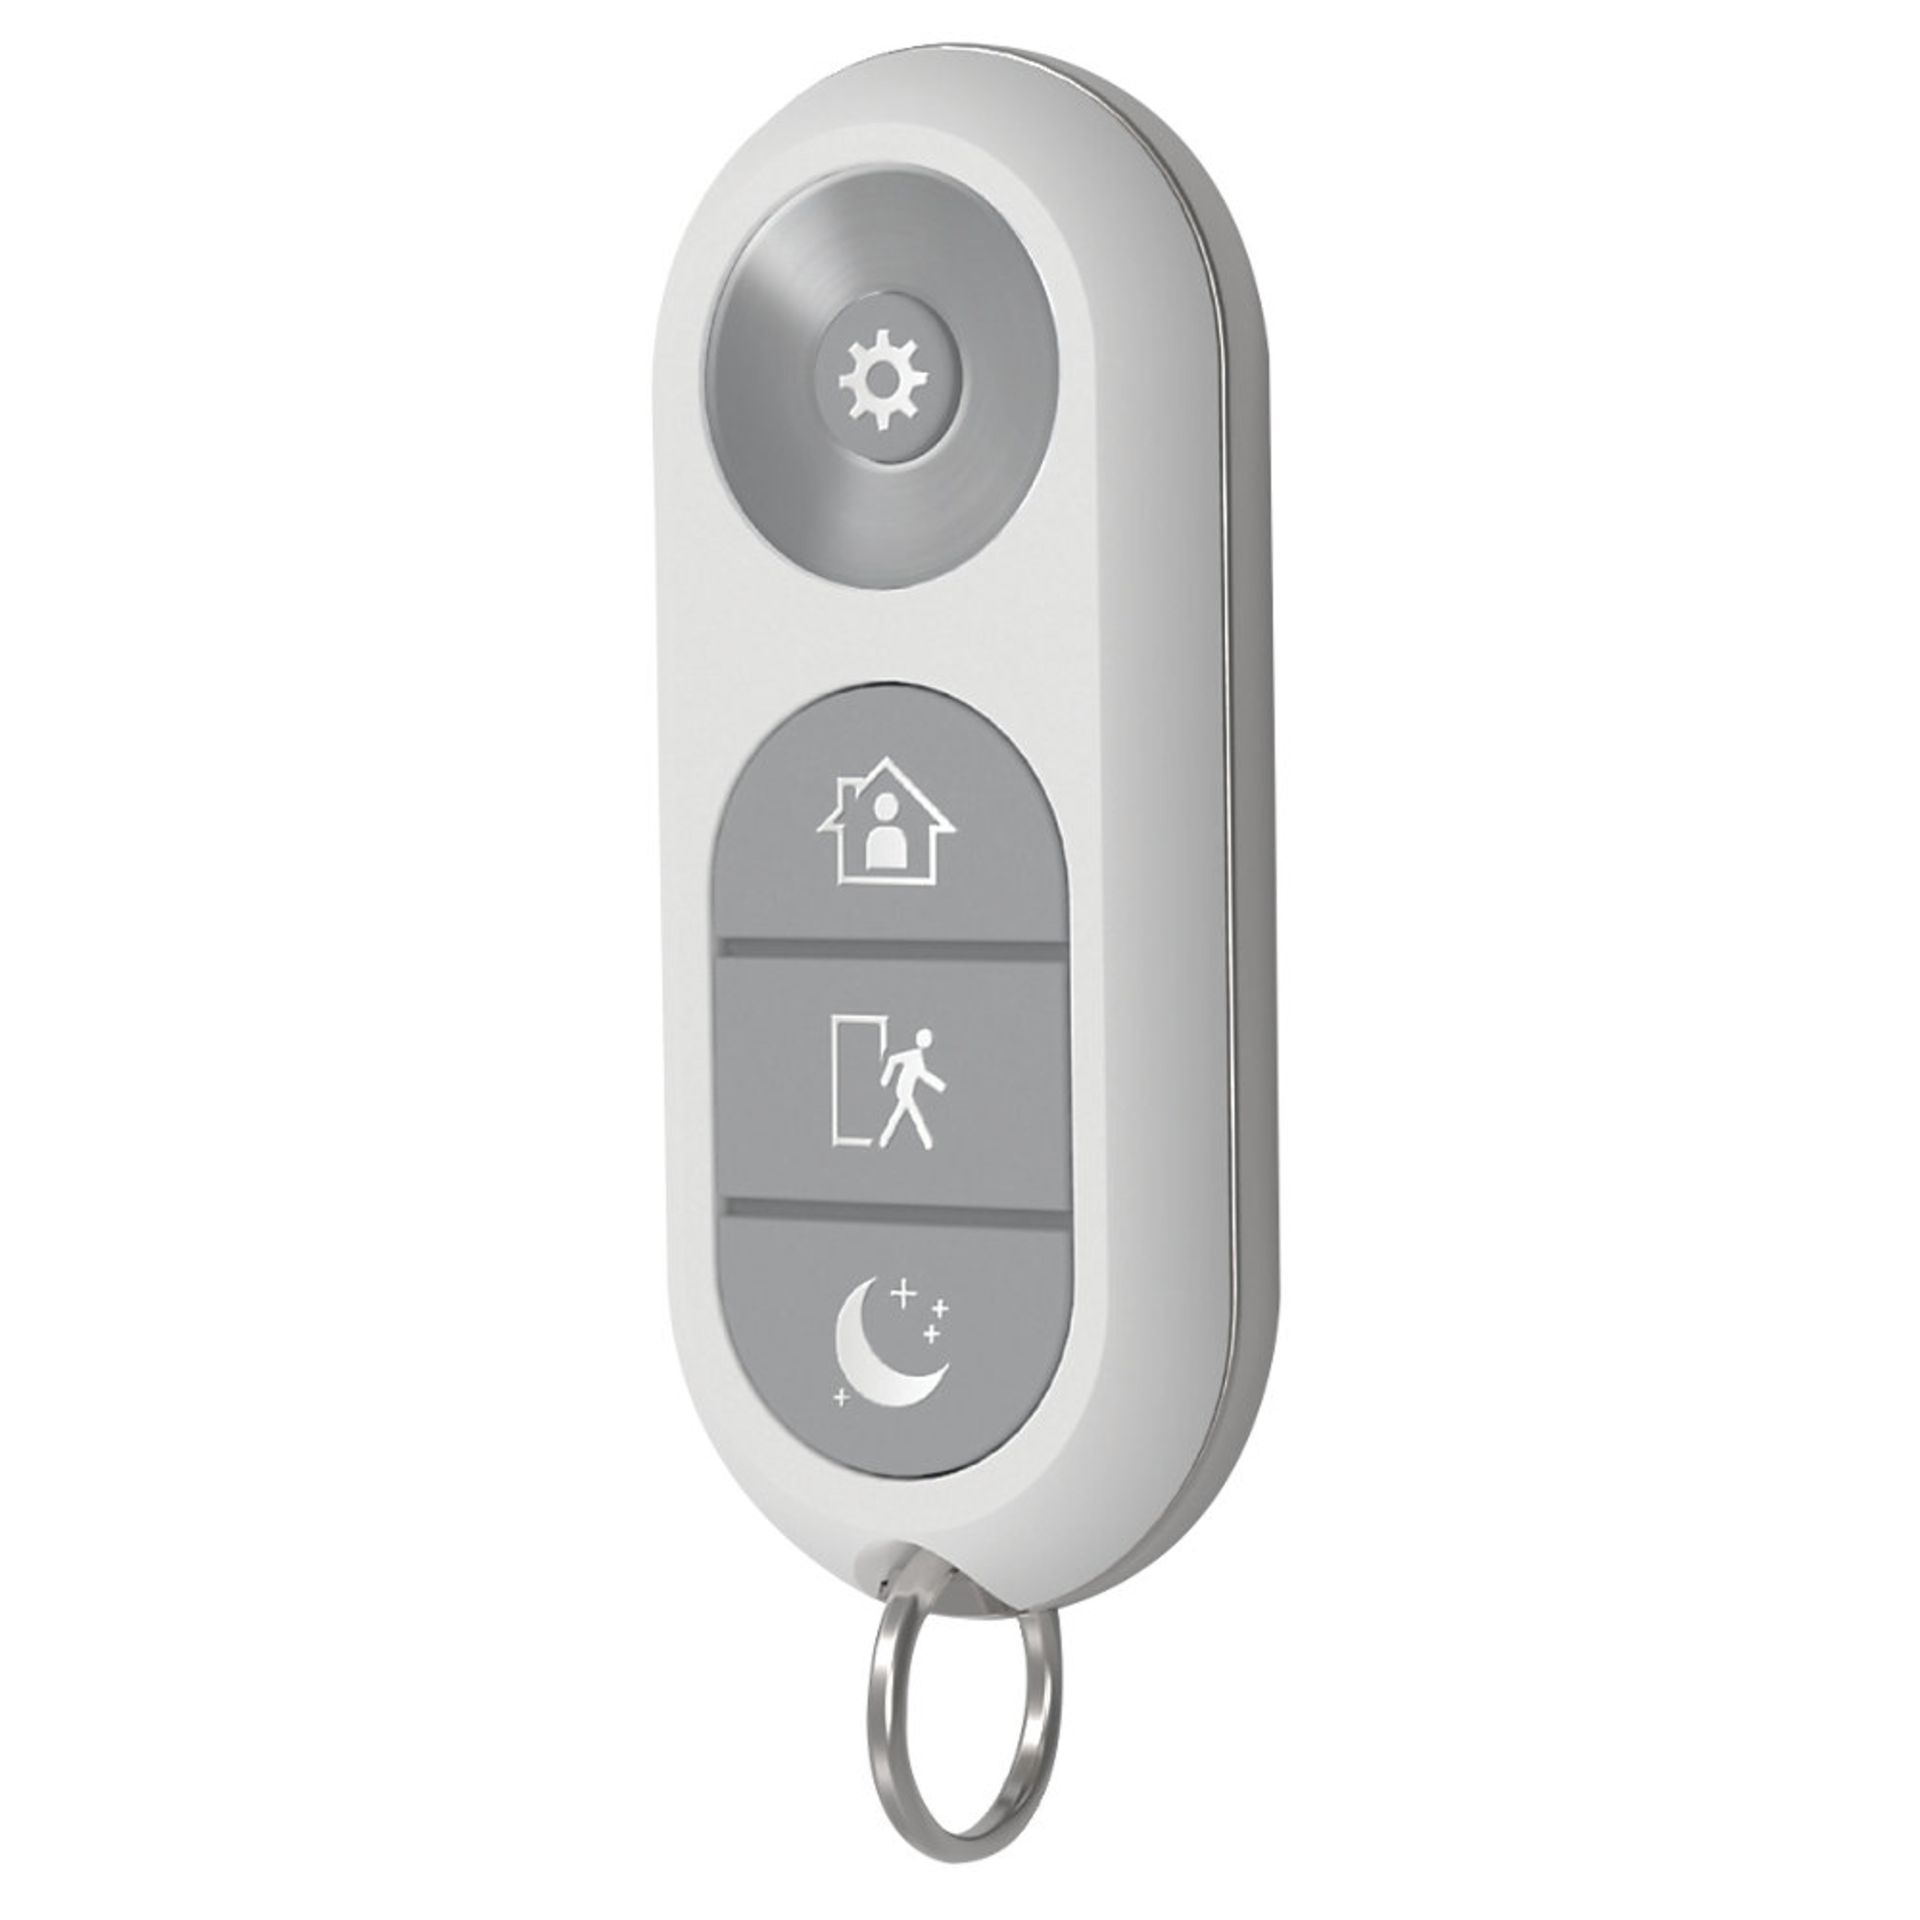 V *TRADE QTY* Grade A Swann One Remote Control Key Fob to Control Your Swann One Security and Camera